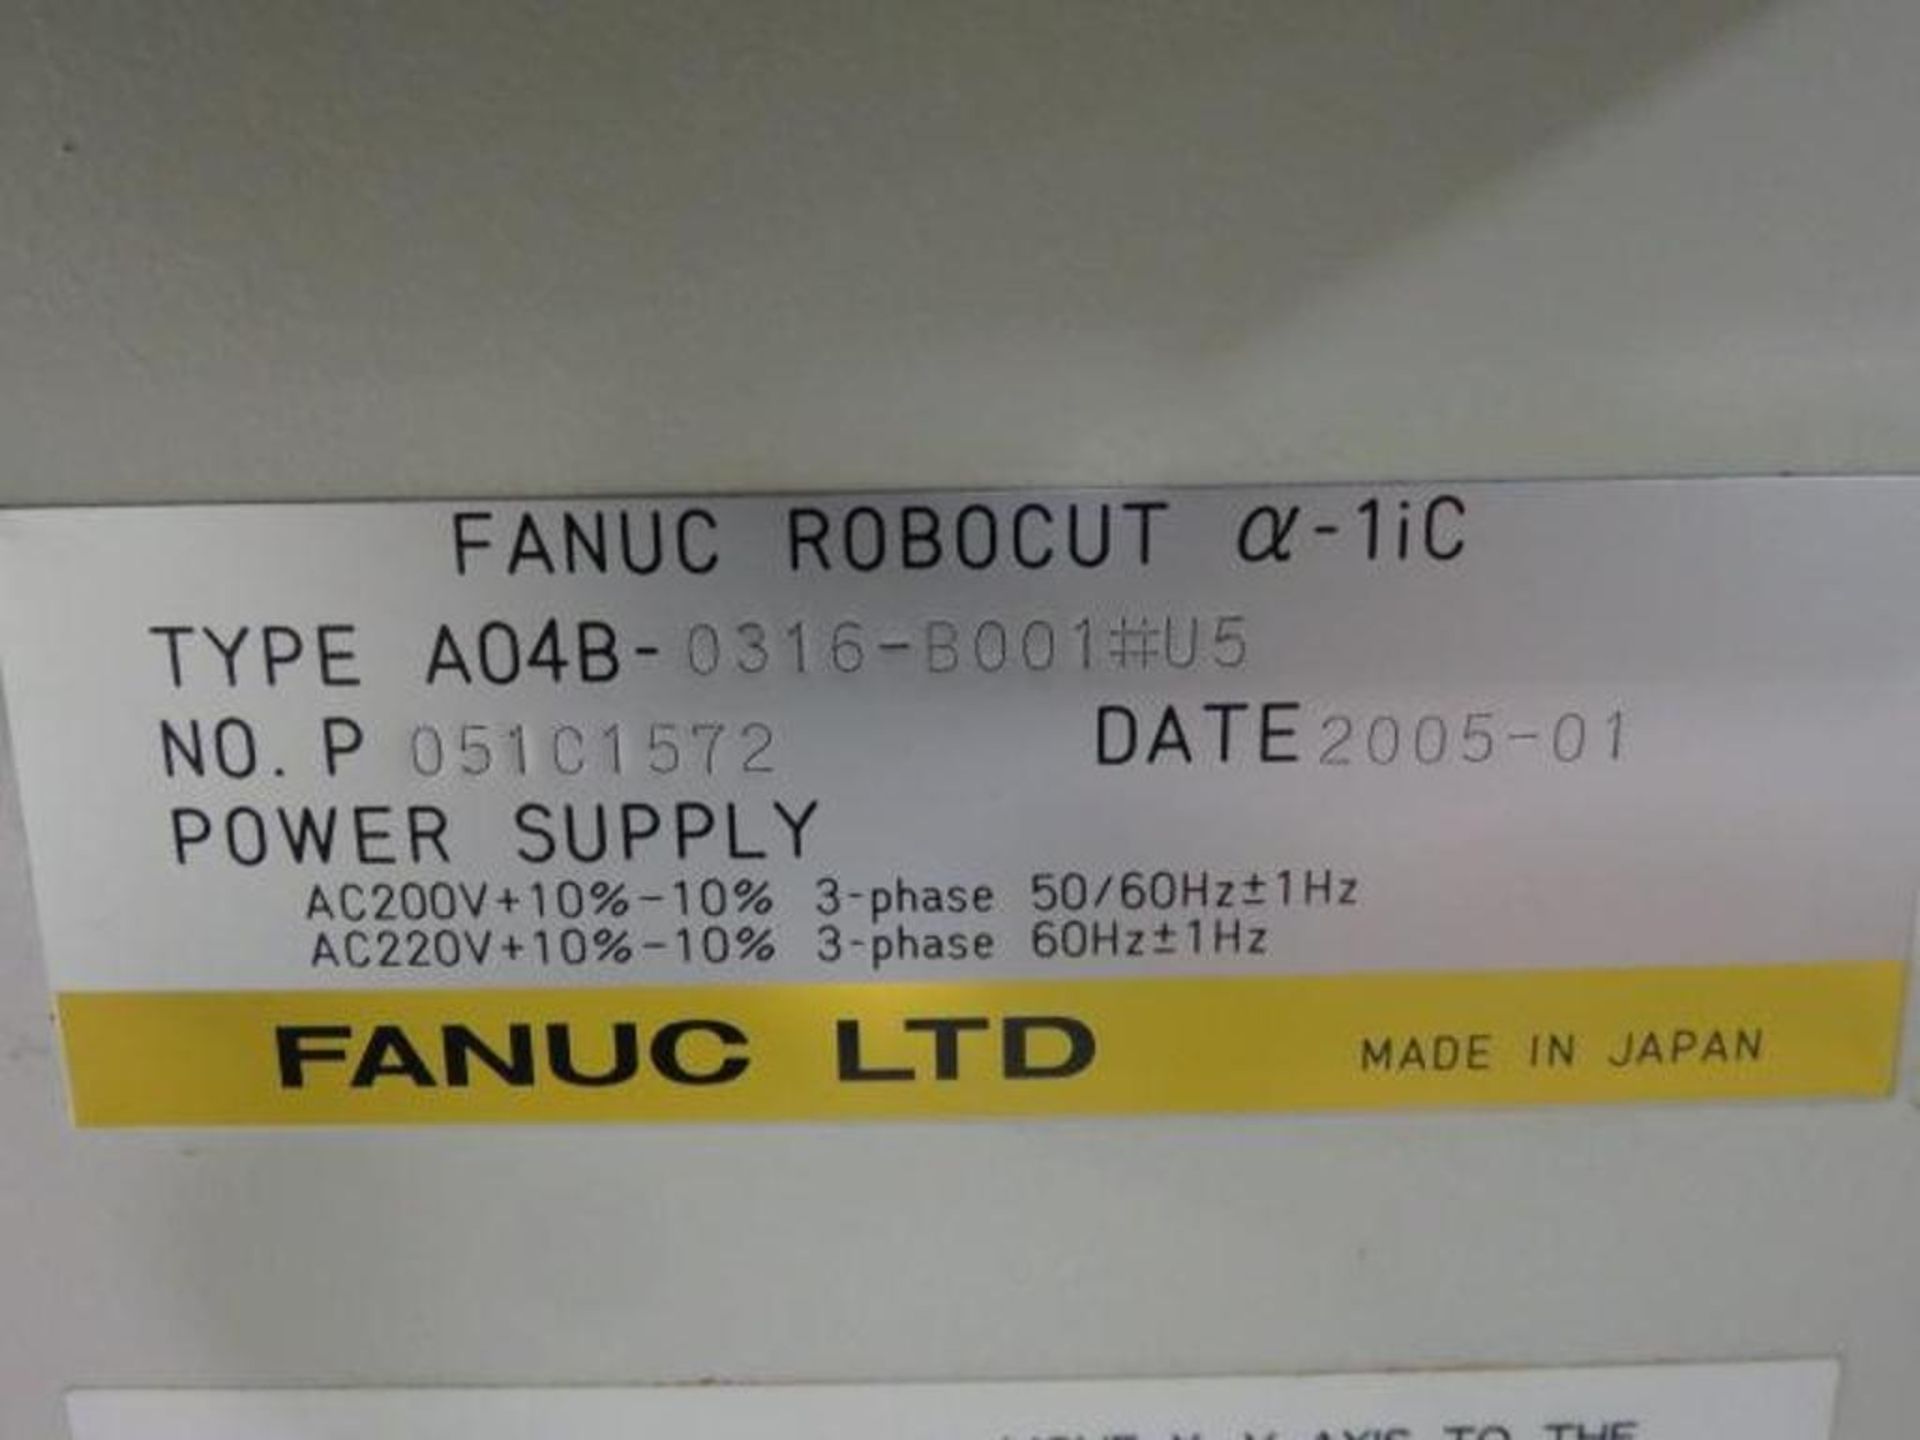 Fanuc 4-Axis CNC Wire EDM Machine Model Robocut AX-1iC, S/N P051C1572 (2005), 43 in. x 33 in. x 21 i - Image 5 of 5